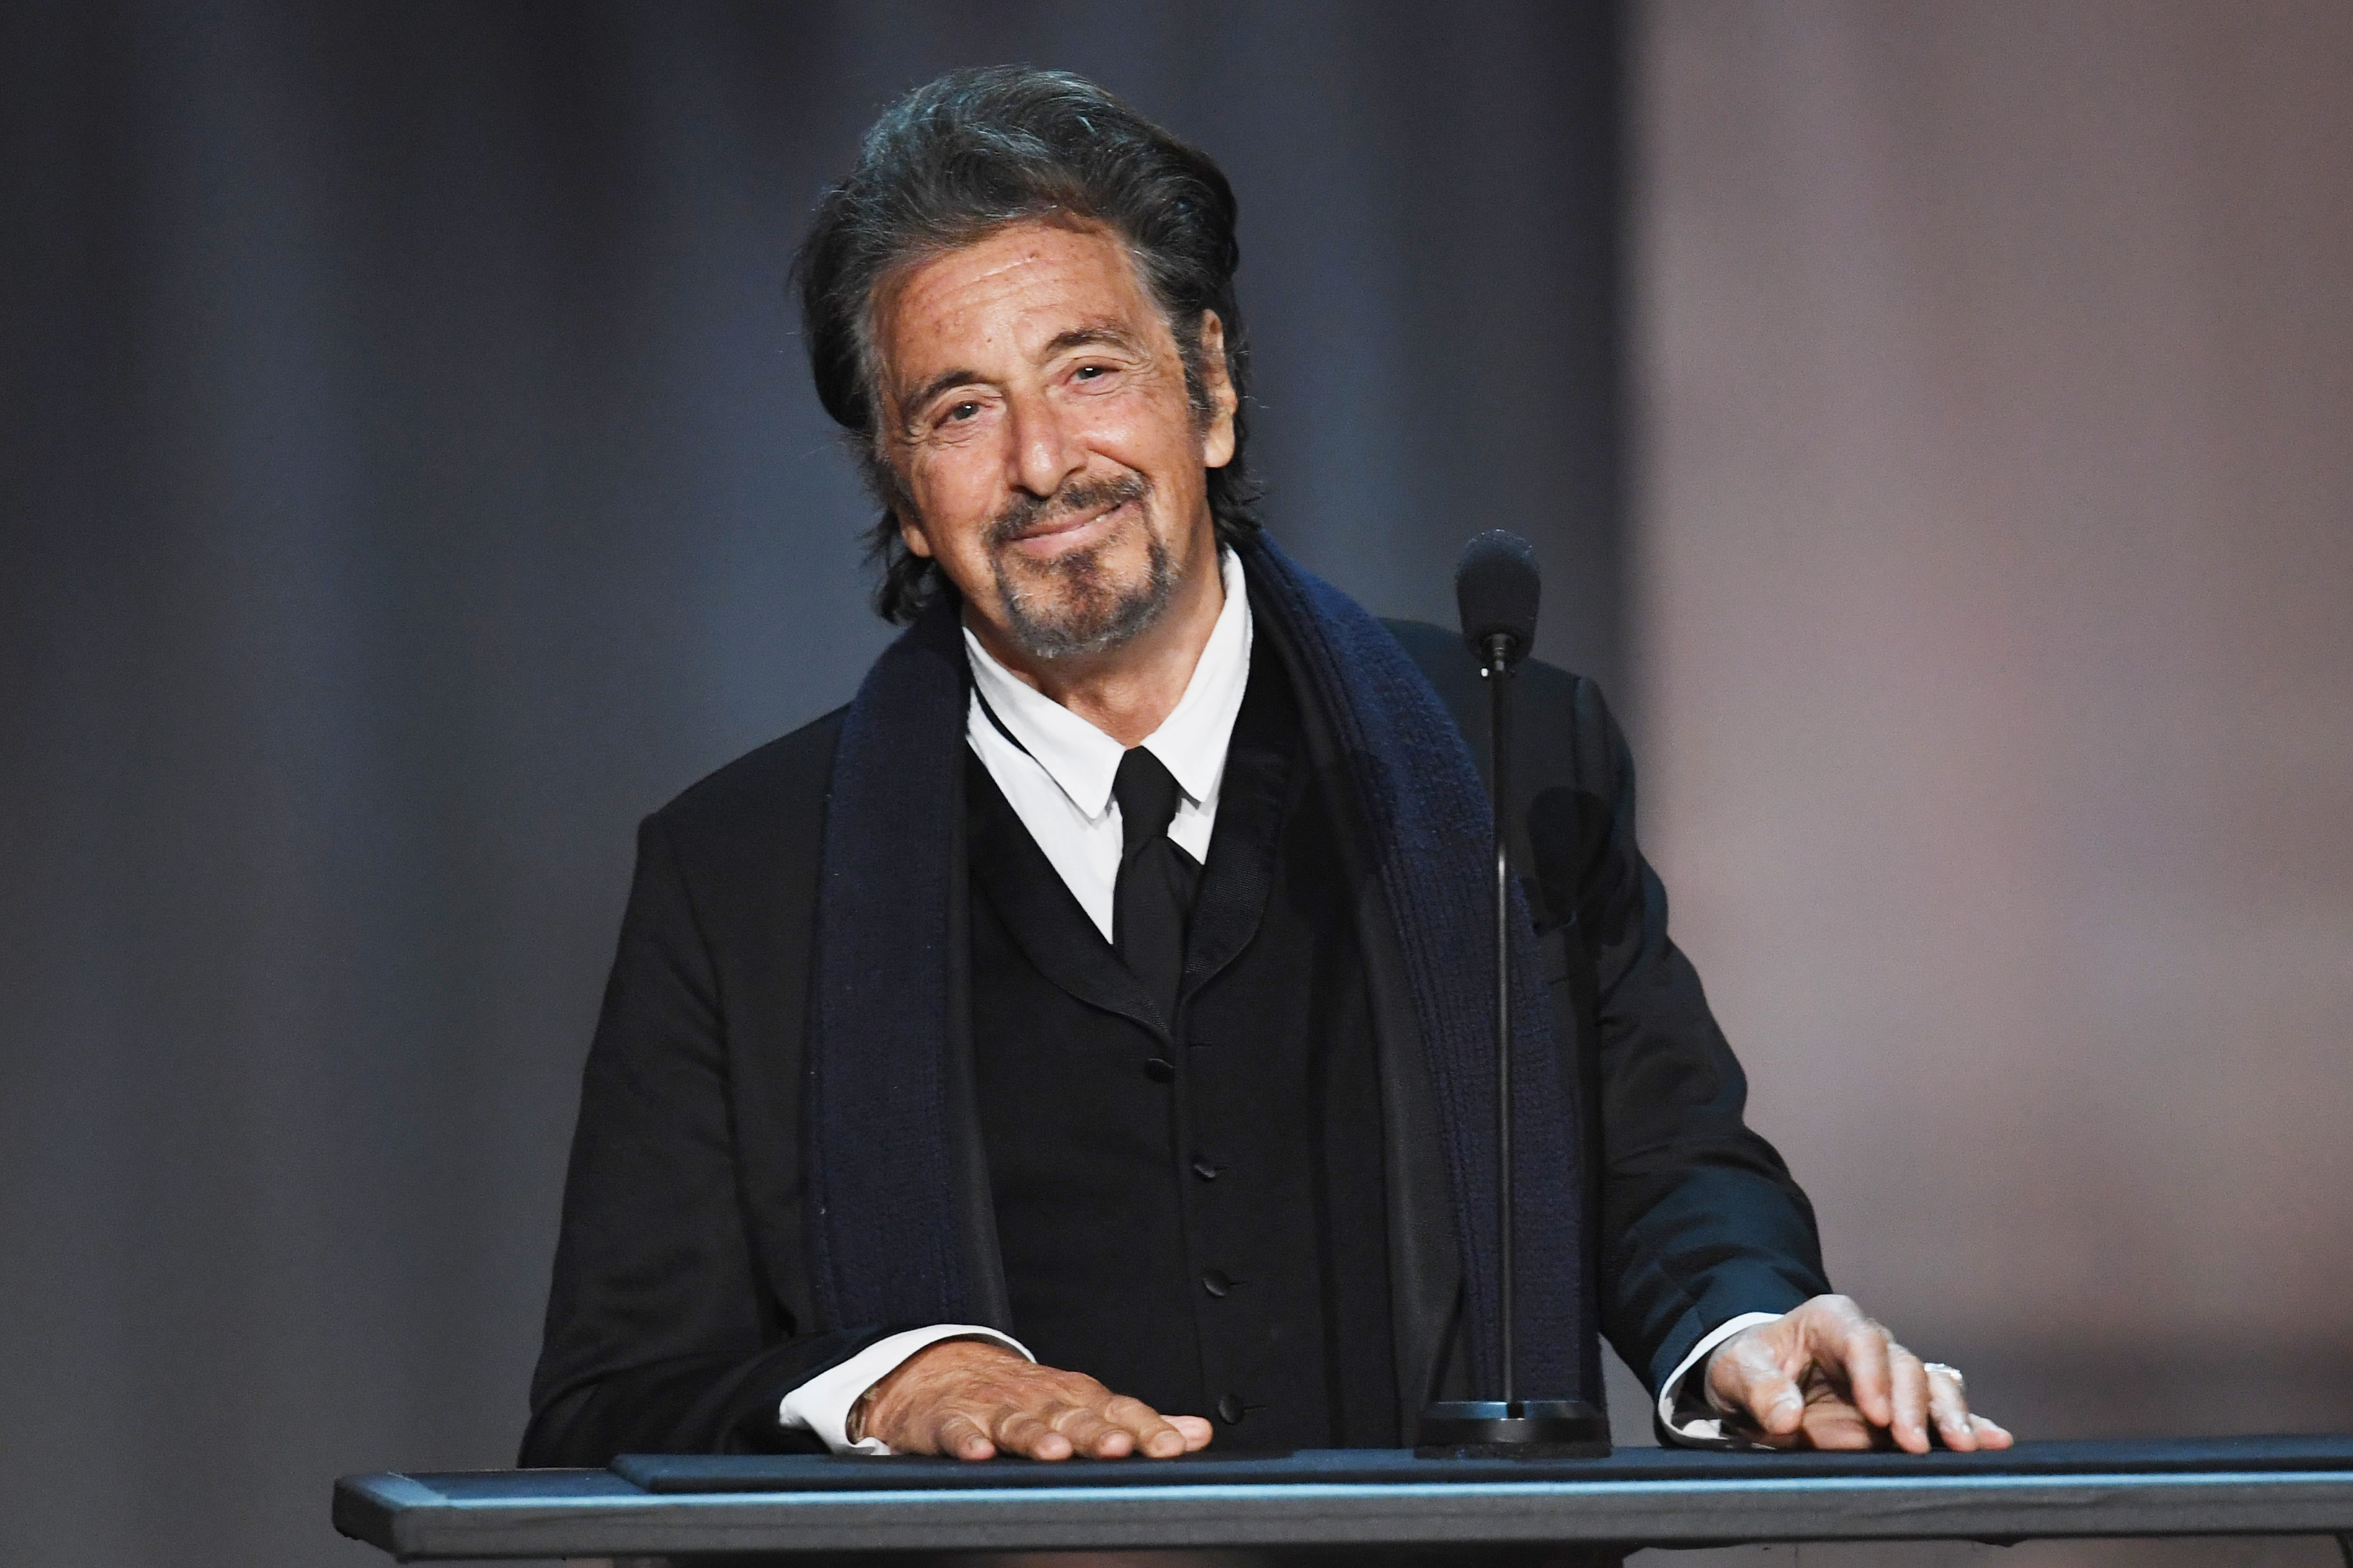 HOLLYWOOD, CA - JUNE 08:  Actor Al Pacino speaks onstage during American Film Institute's 45th Life Achievement Award Gala Tribute to Diane Keaton at Dolby Theatre on June 8, 2017 in Hollywood, California. 26658_007  (Photo by Kevin Winter/Getty Images)